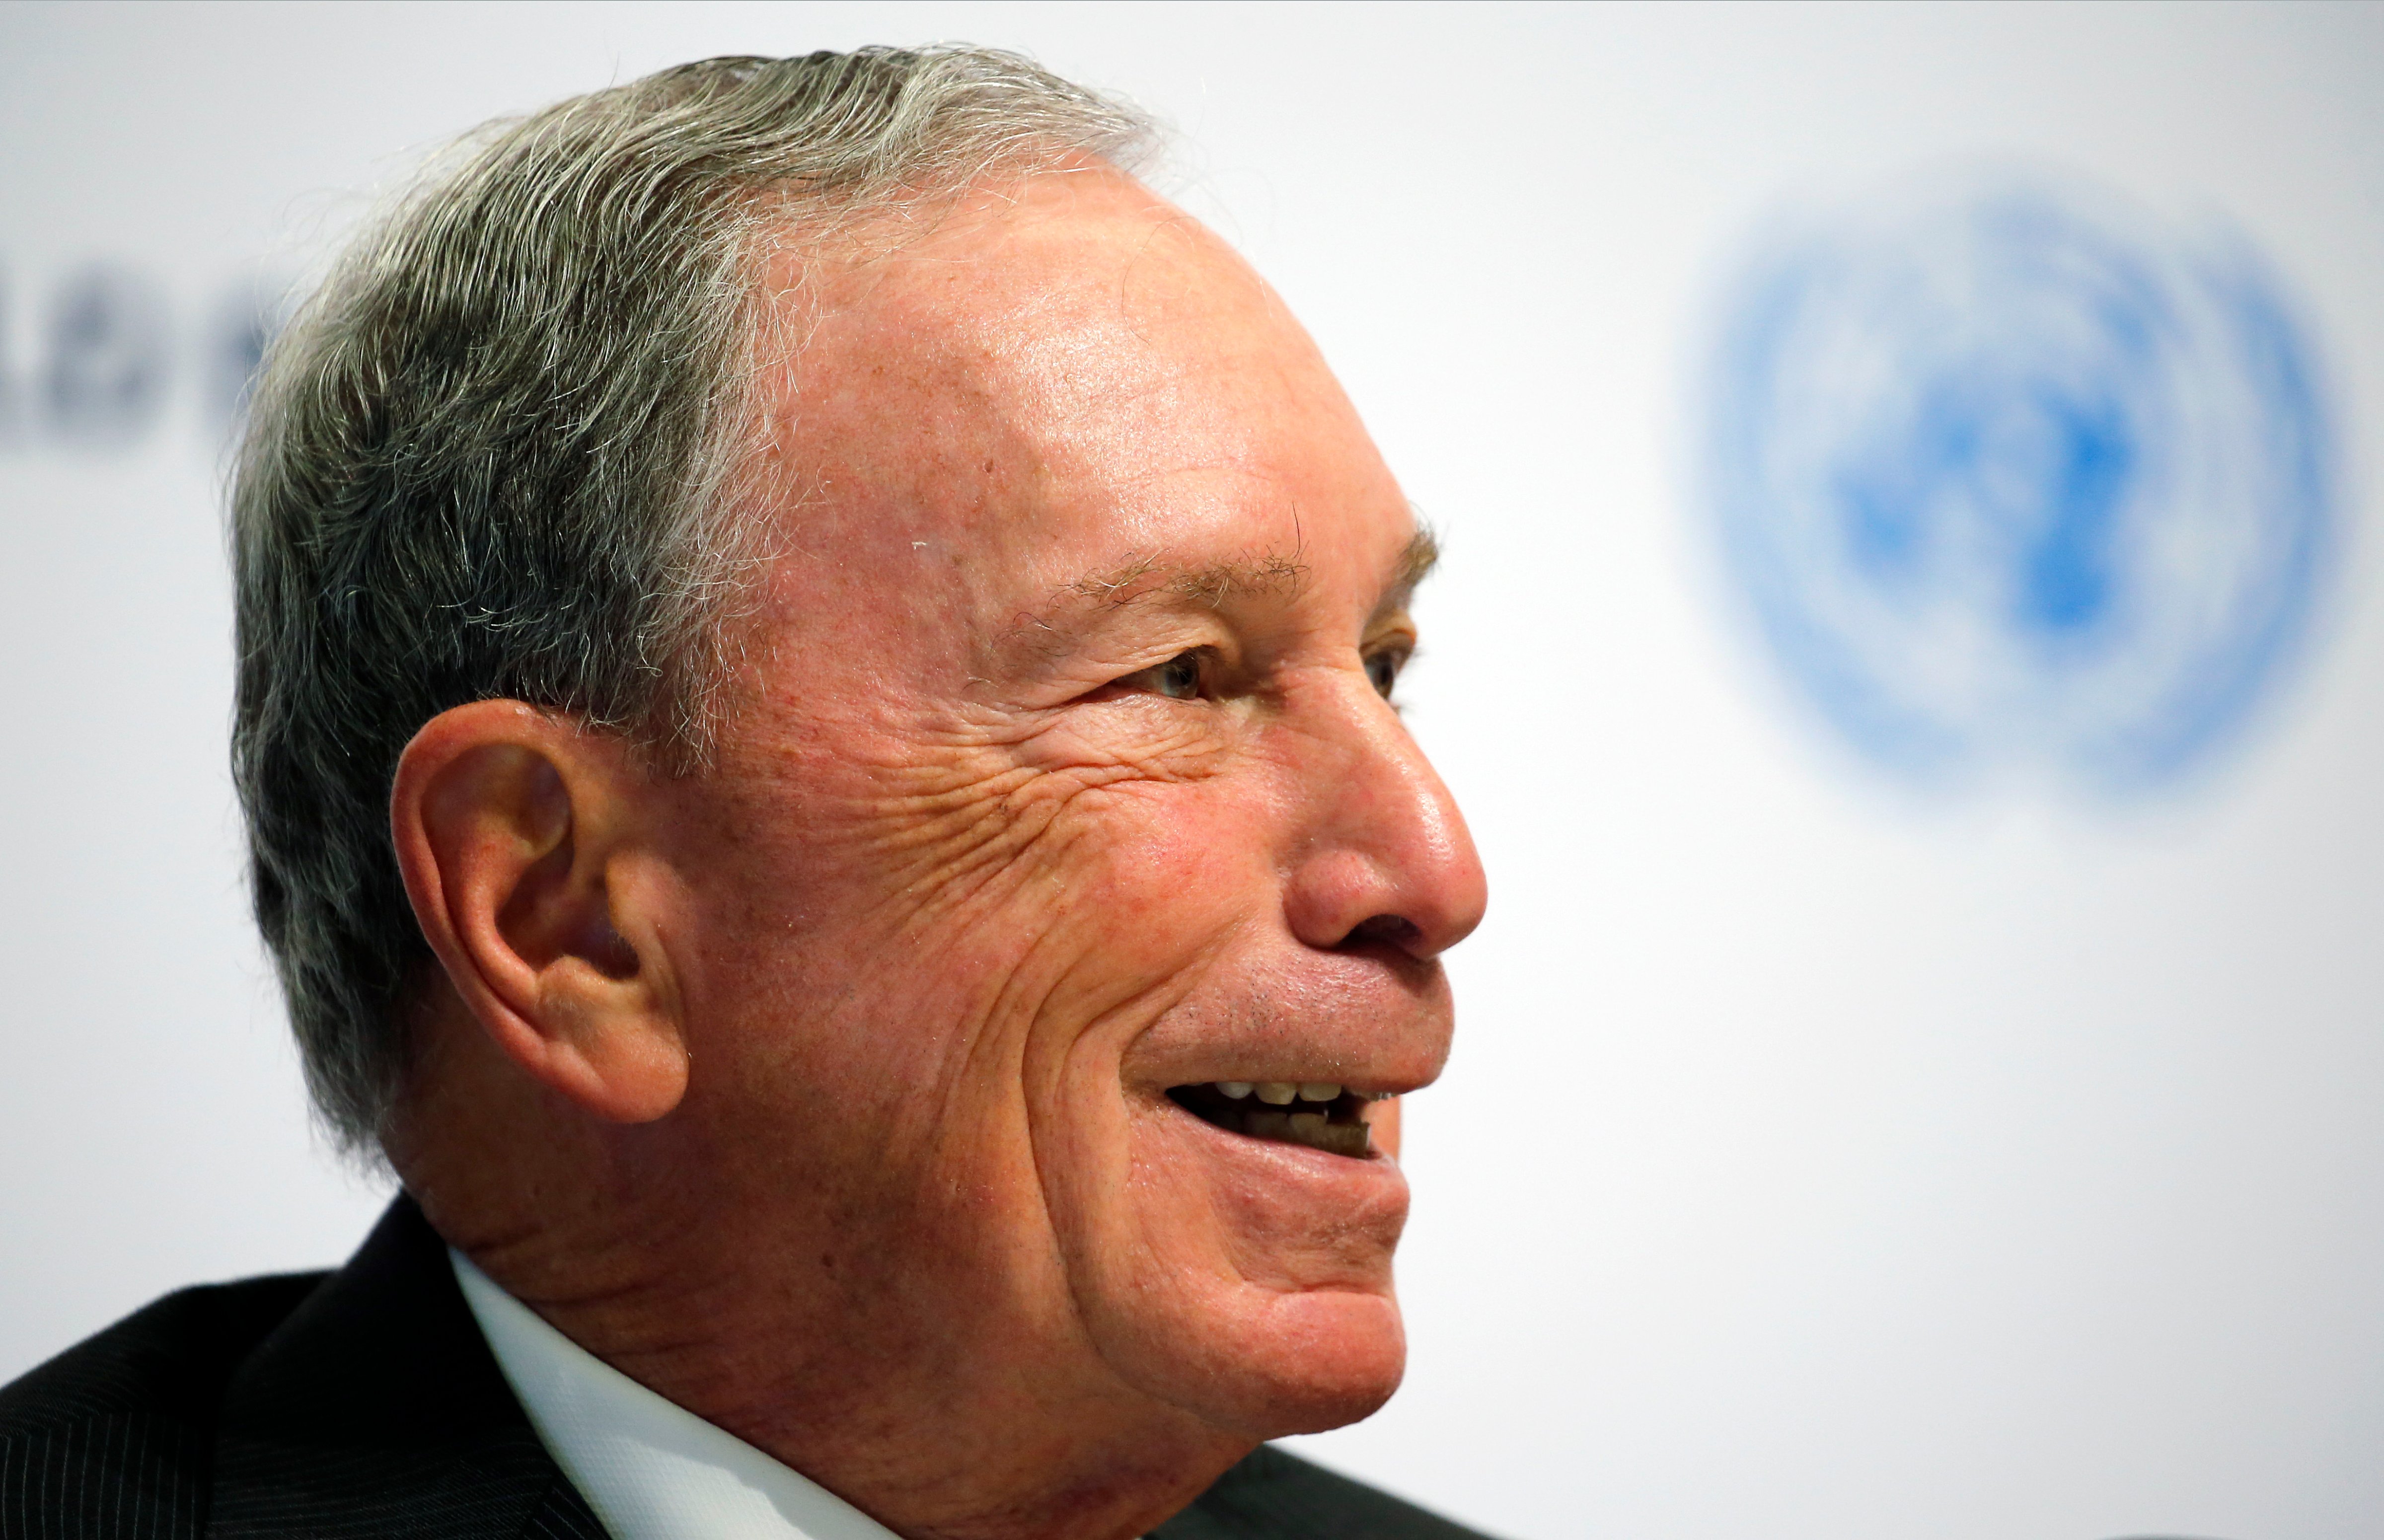 Special envoy to the United Nations for climate change Michael Bloomberg attends a press conference during the One Planet Summit at the Seine Musicale on the Ile Sequin on Dec. 12 in Boulogne-Billancourt, France (Chesnot—Getty Images)